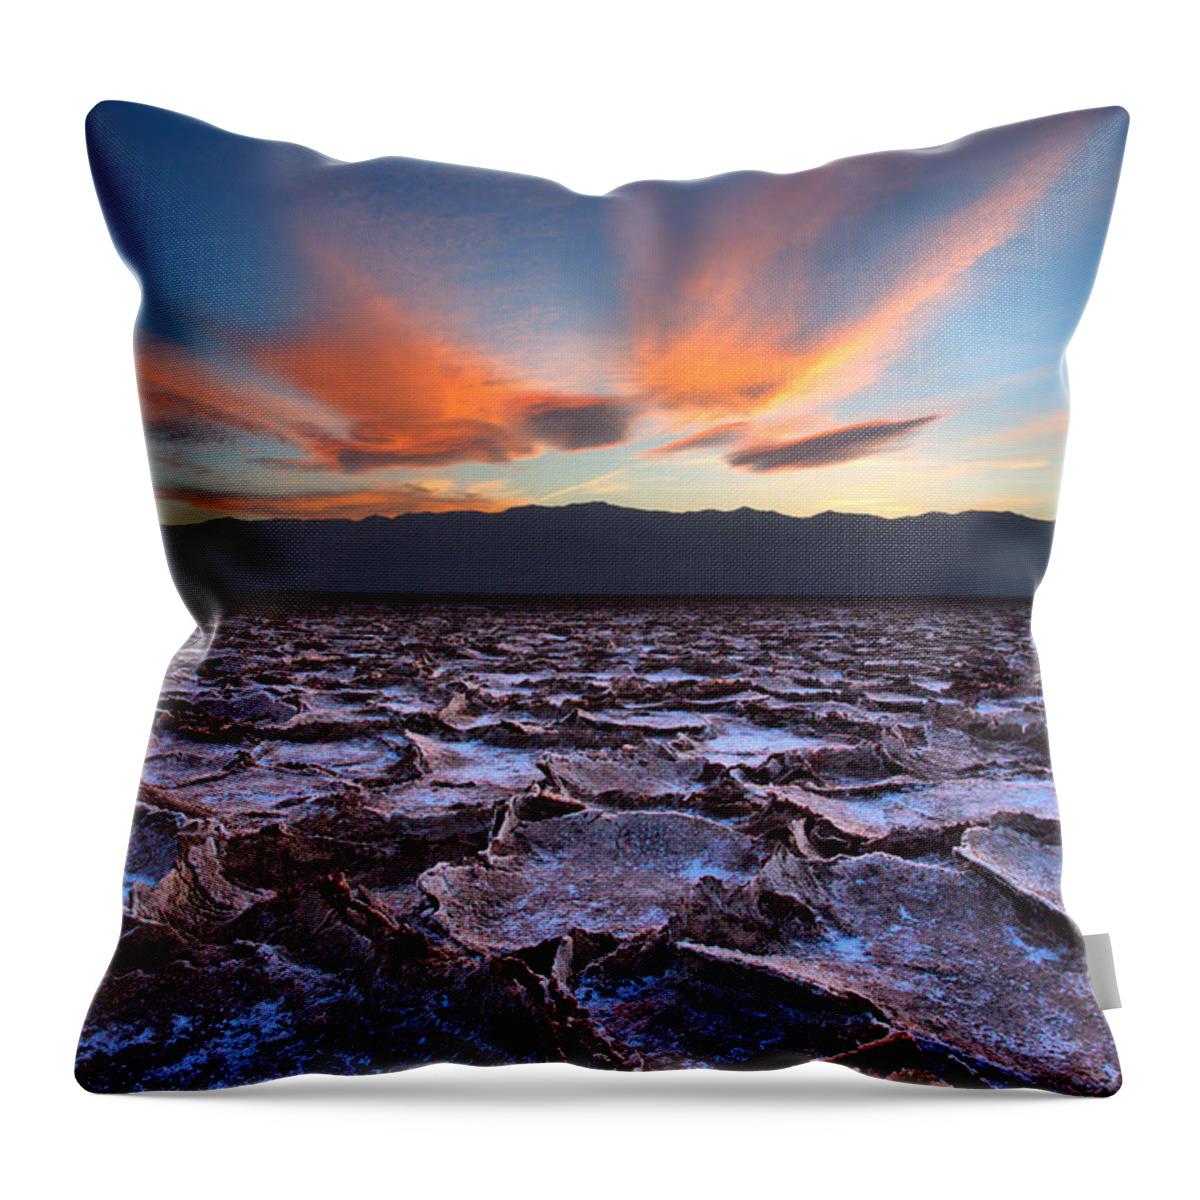 Badwater; Below Sea Level; Death Valley; Landscape; Minus 282; Mud; National Park; Ridges; Salt; Salt Pan; Sunset; Throw Pillow featuring the photograph Fire in the Sky and Embers Down Below by David Andersen